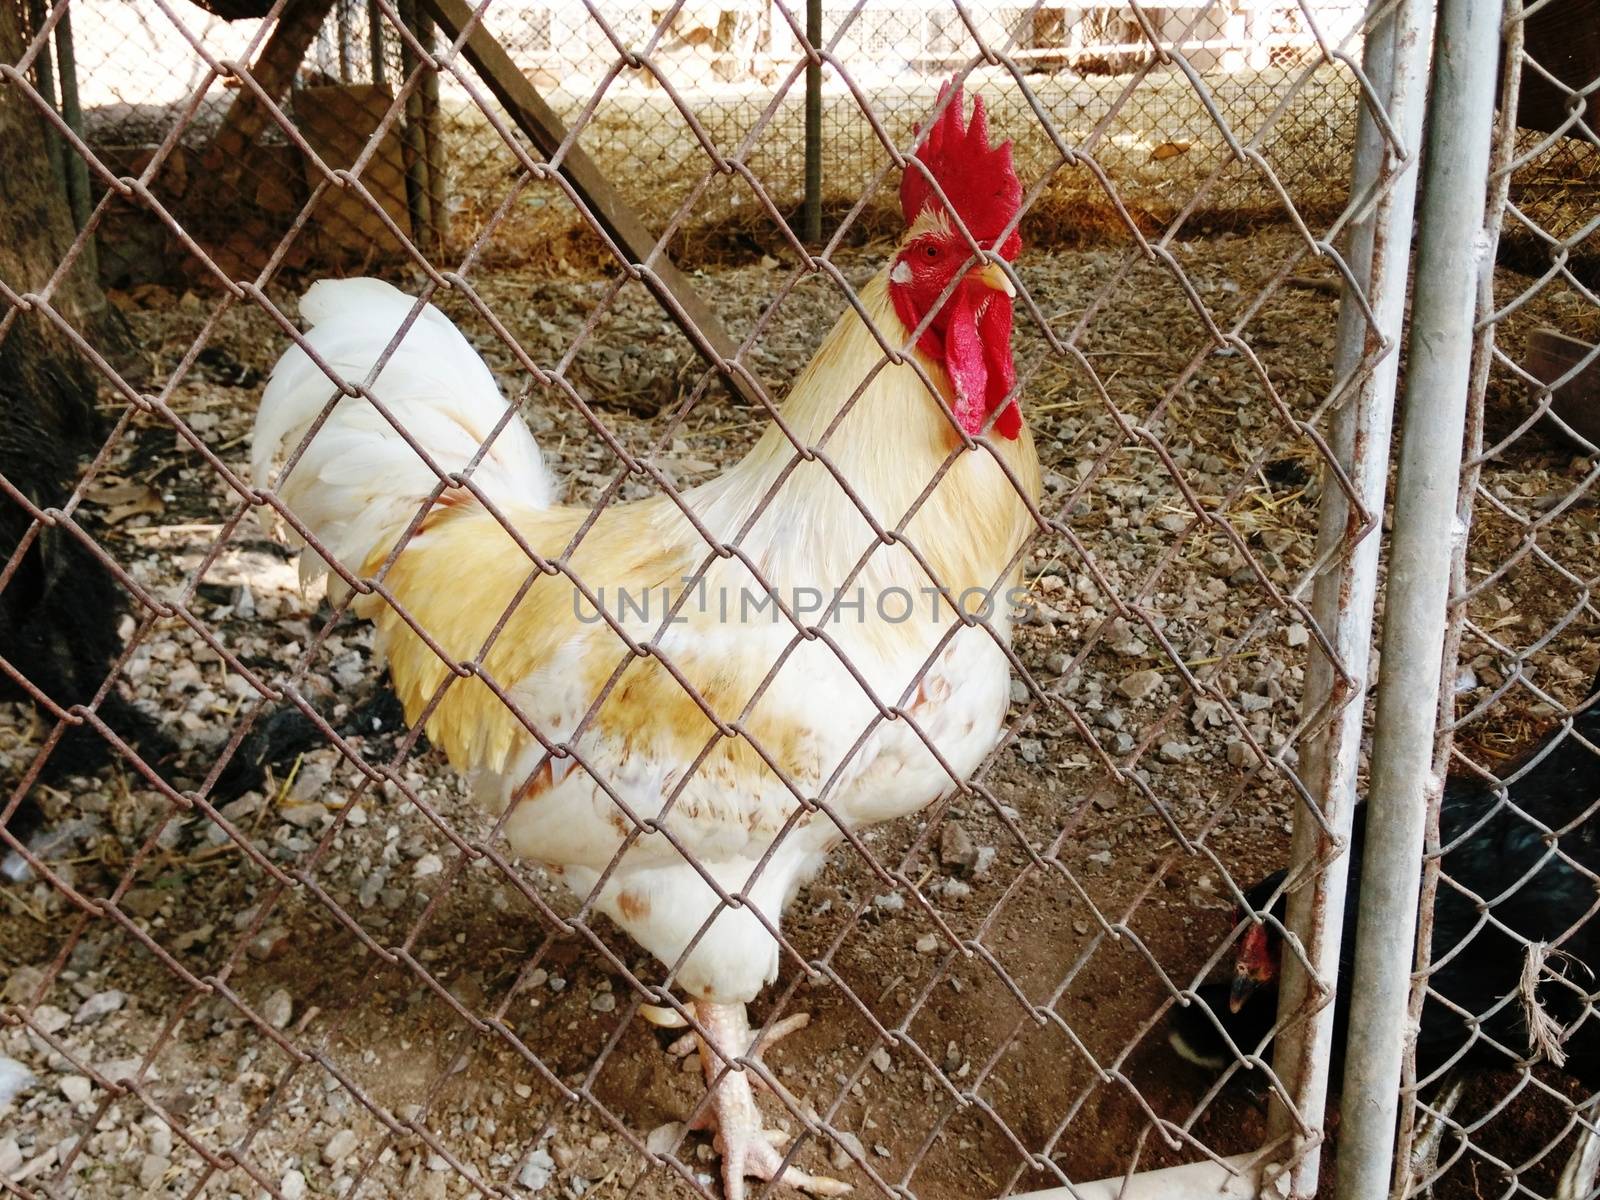 A Red and White Chicken in the Cage